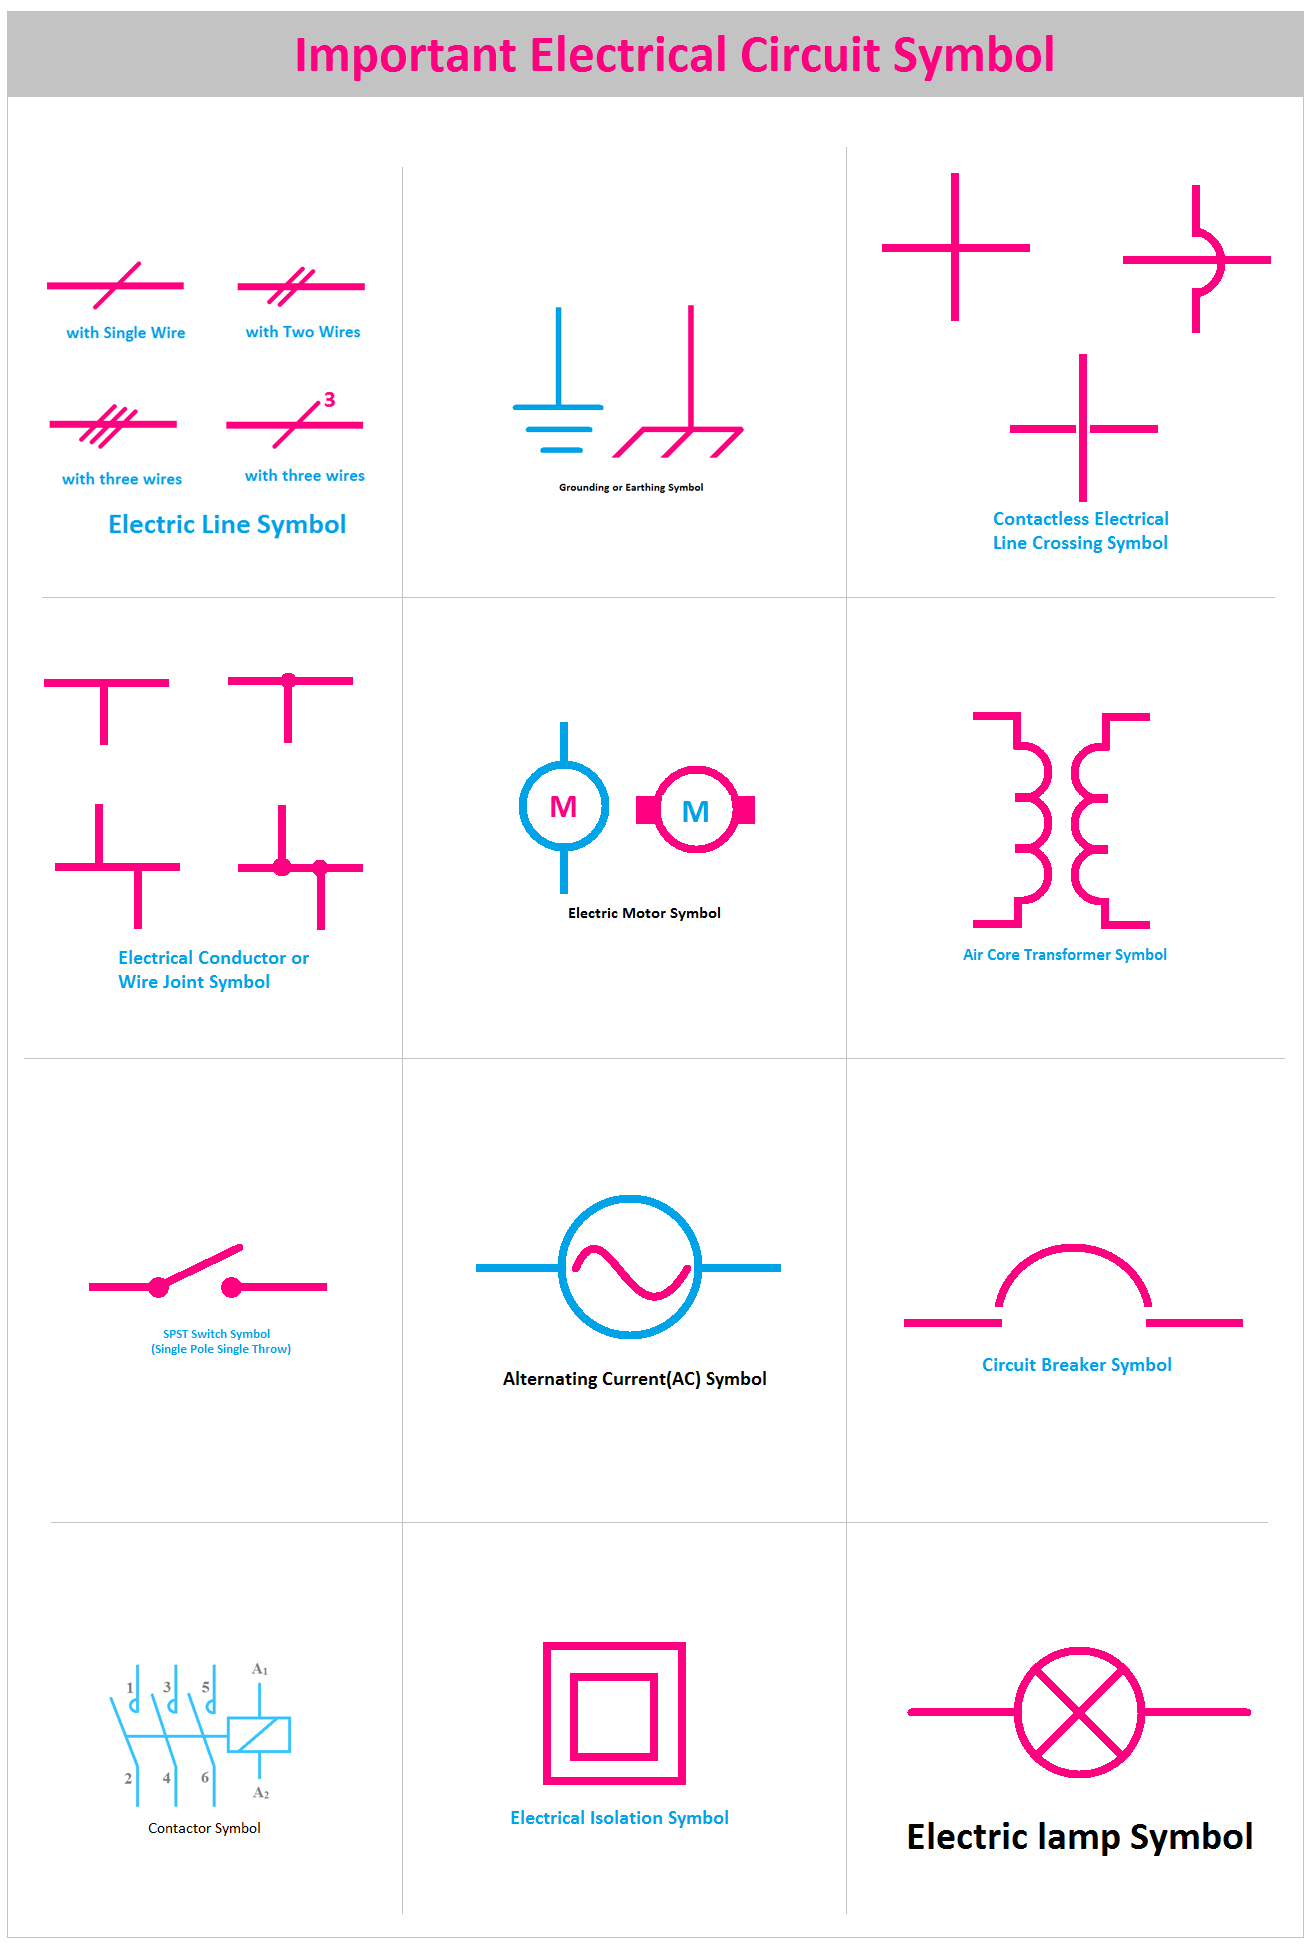 Electrical Circuit Symbols, symbols to draw electrical circuits